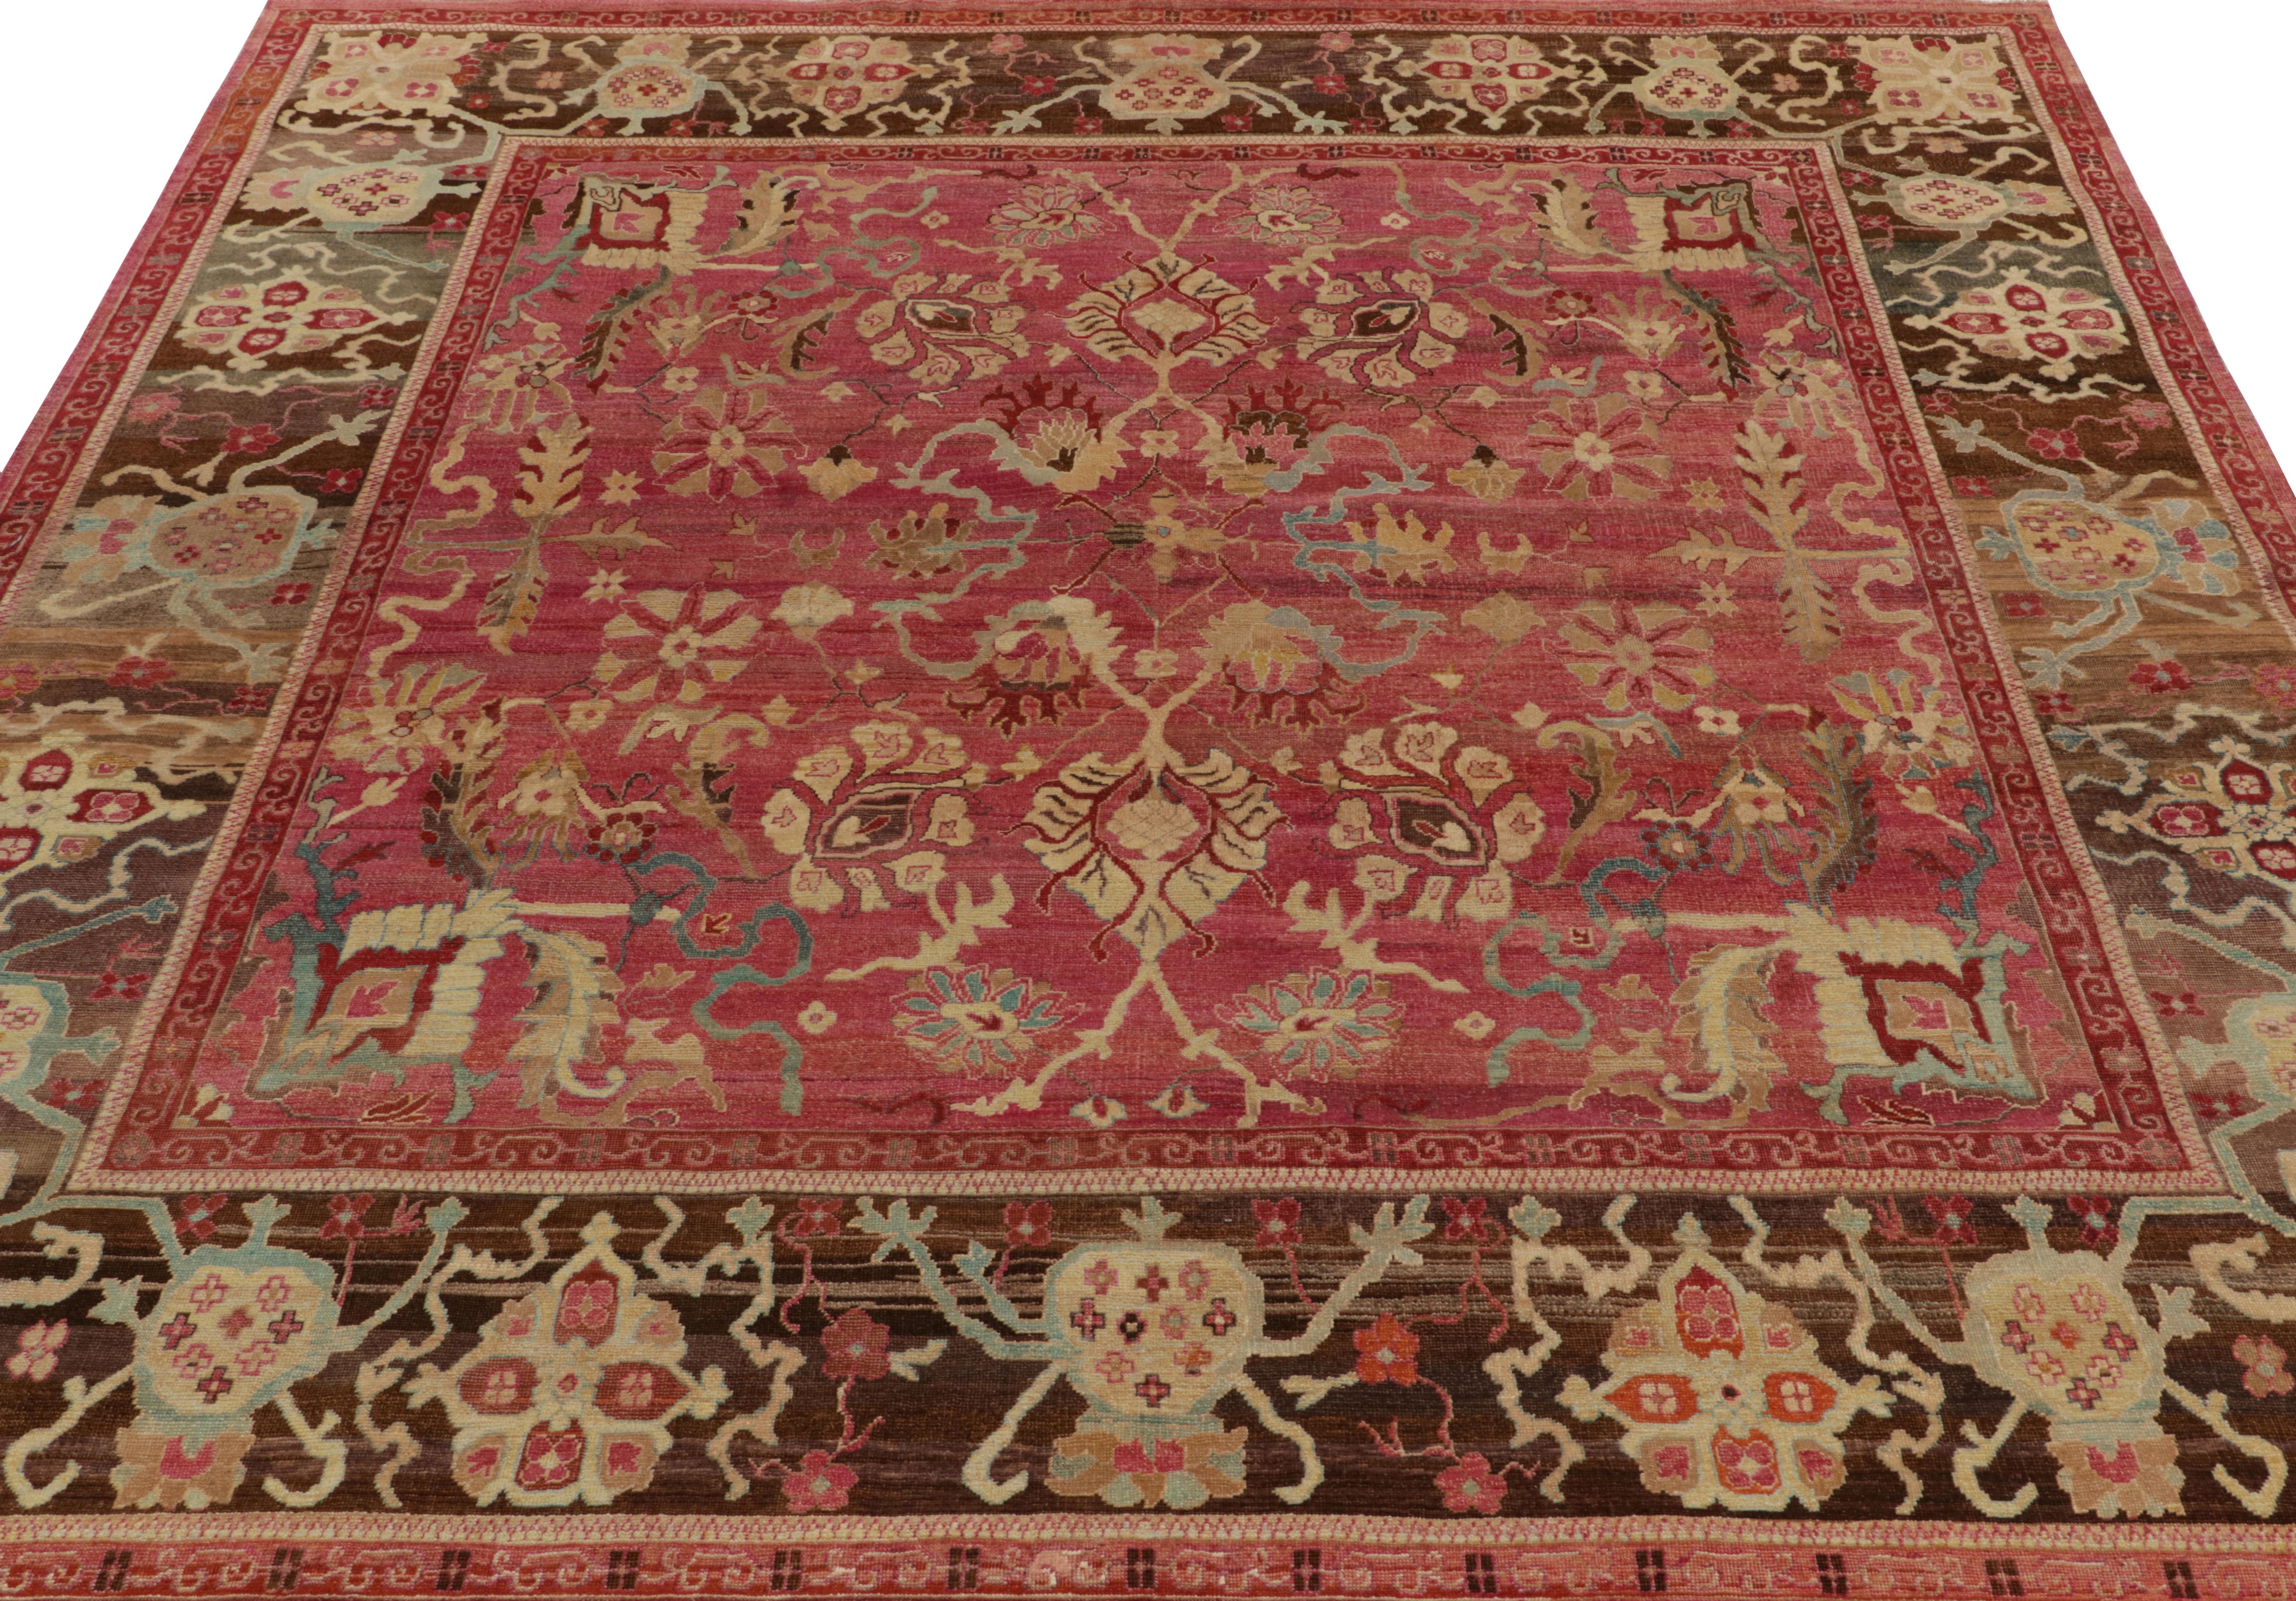 Oushak Rug & Kilim’s Classic Style Square Rug in Pink, Red and Beige-Brown Florals For Sale